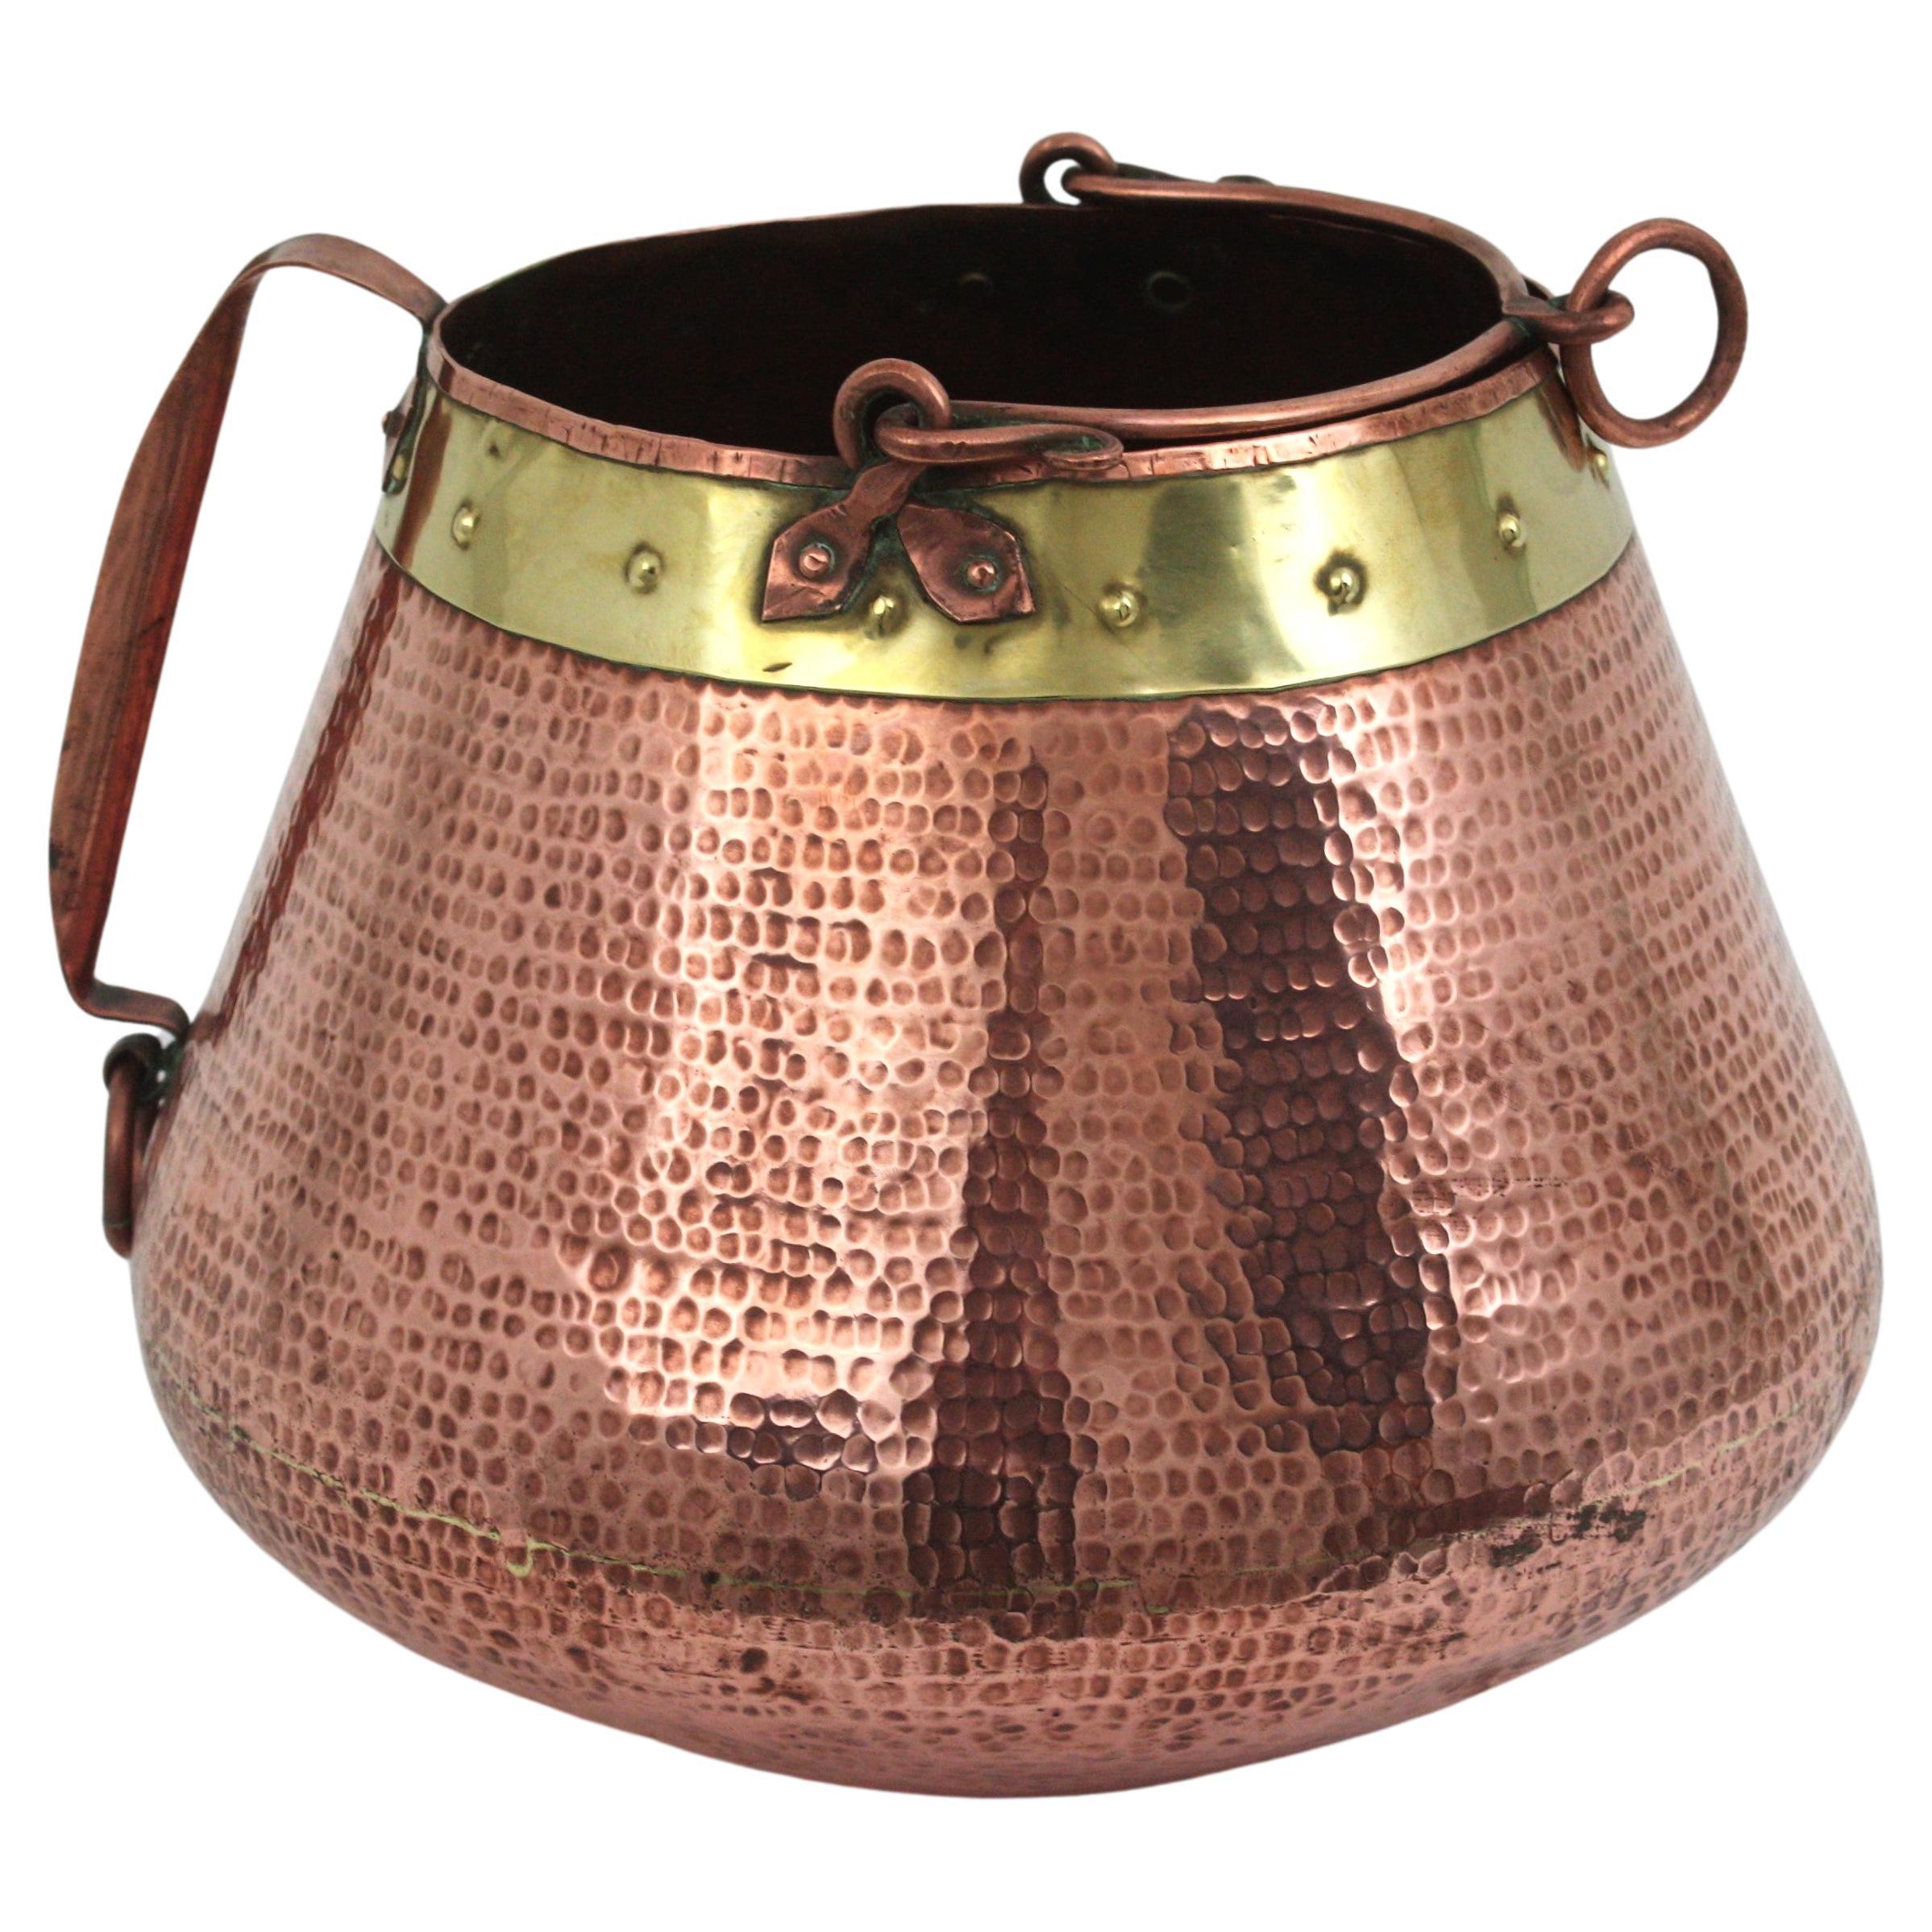 French copper and brass ice bucket or wine / champagne cooler with single handle
This hand-hammered copper cauldron is heavily adorned by the hammer marks thorough and a brass ring with studs on the top.  It has a copper foldable handle with a ring